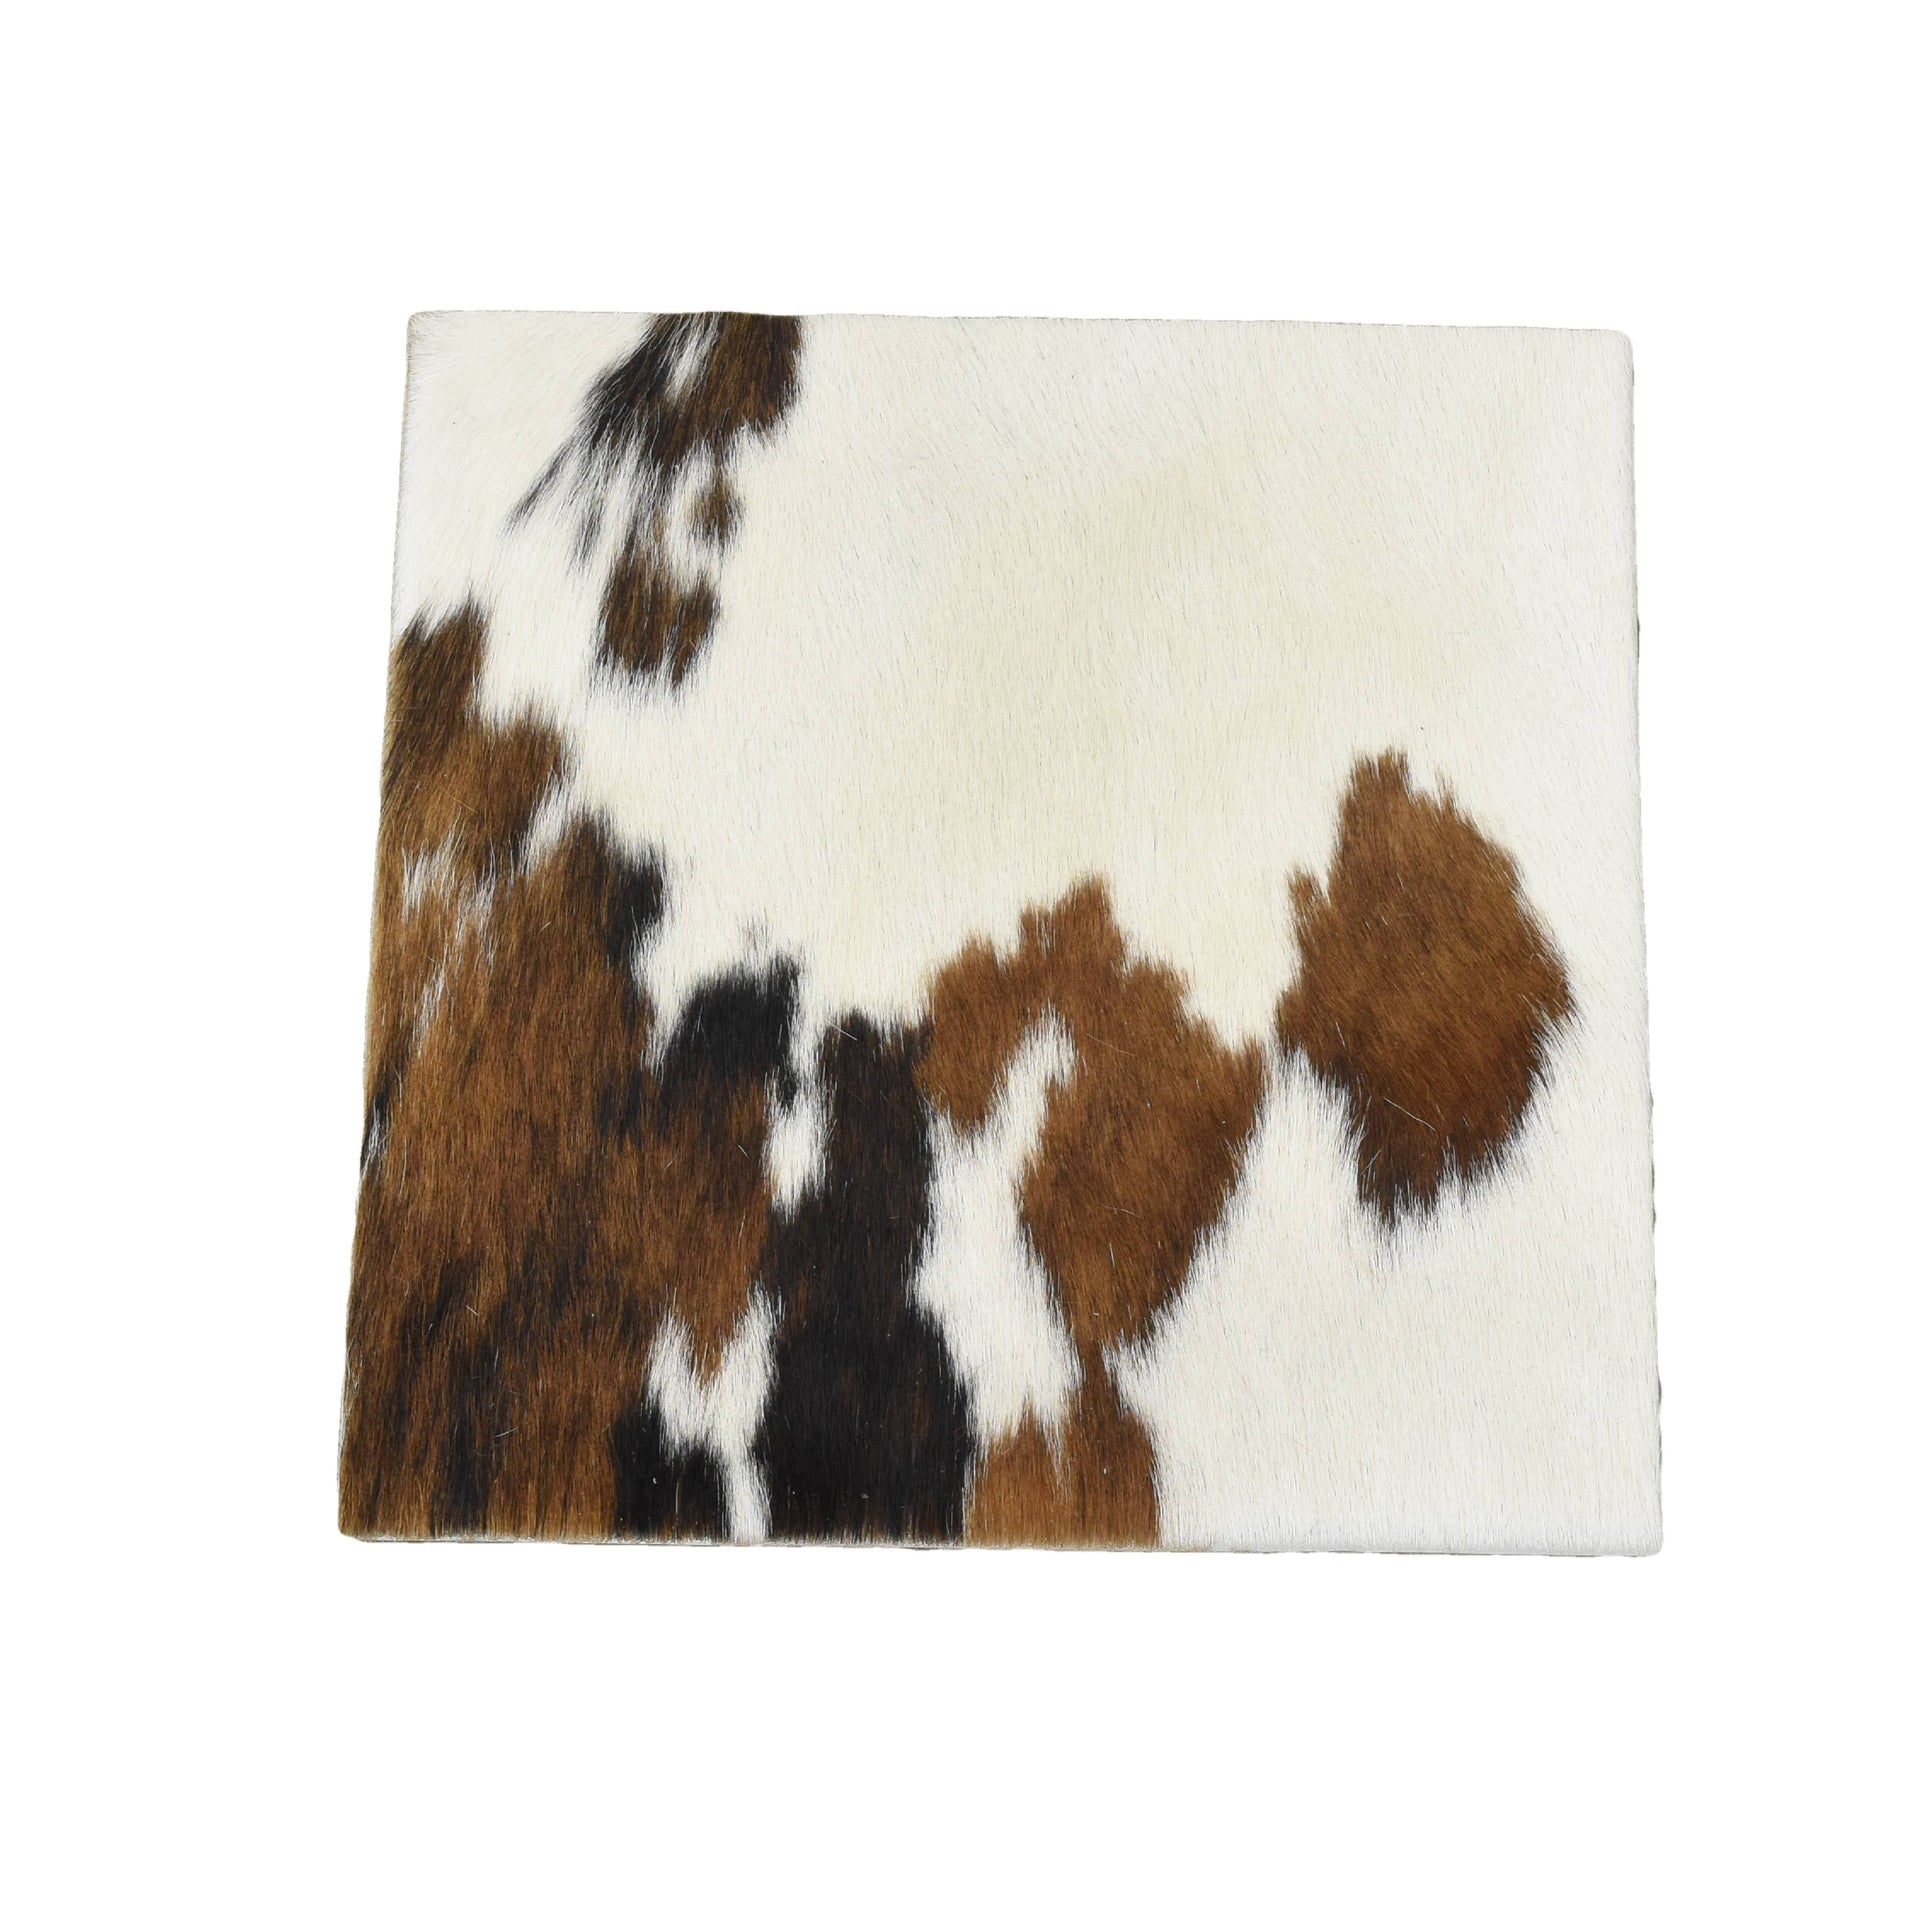 Tri-Colored Black/Brown/Off White Hair on Cow Hide Pre-cut, 12 x 12 | The Leather Guy